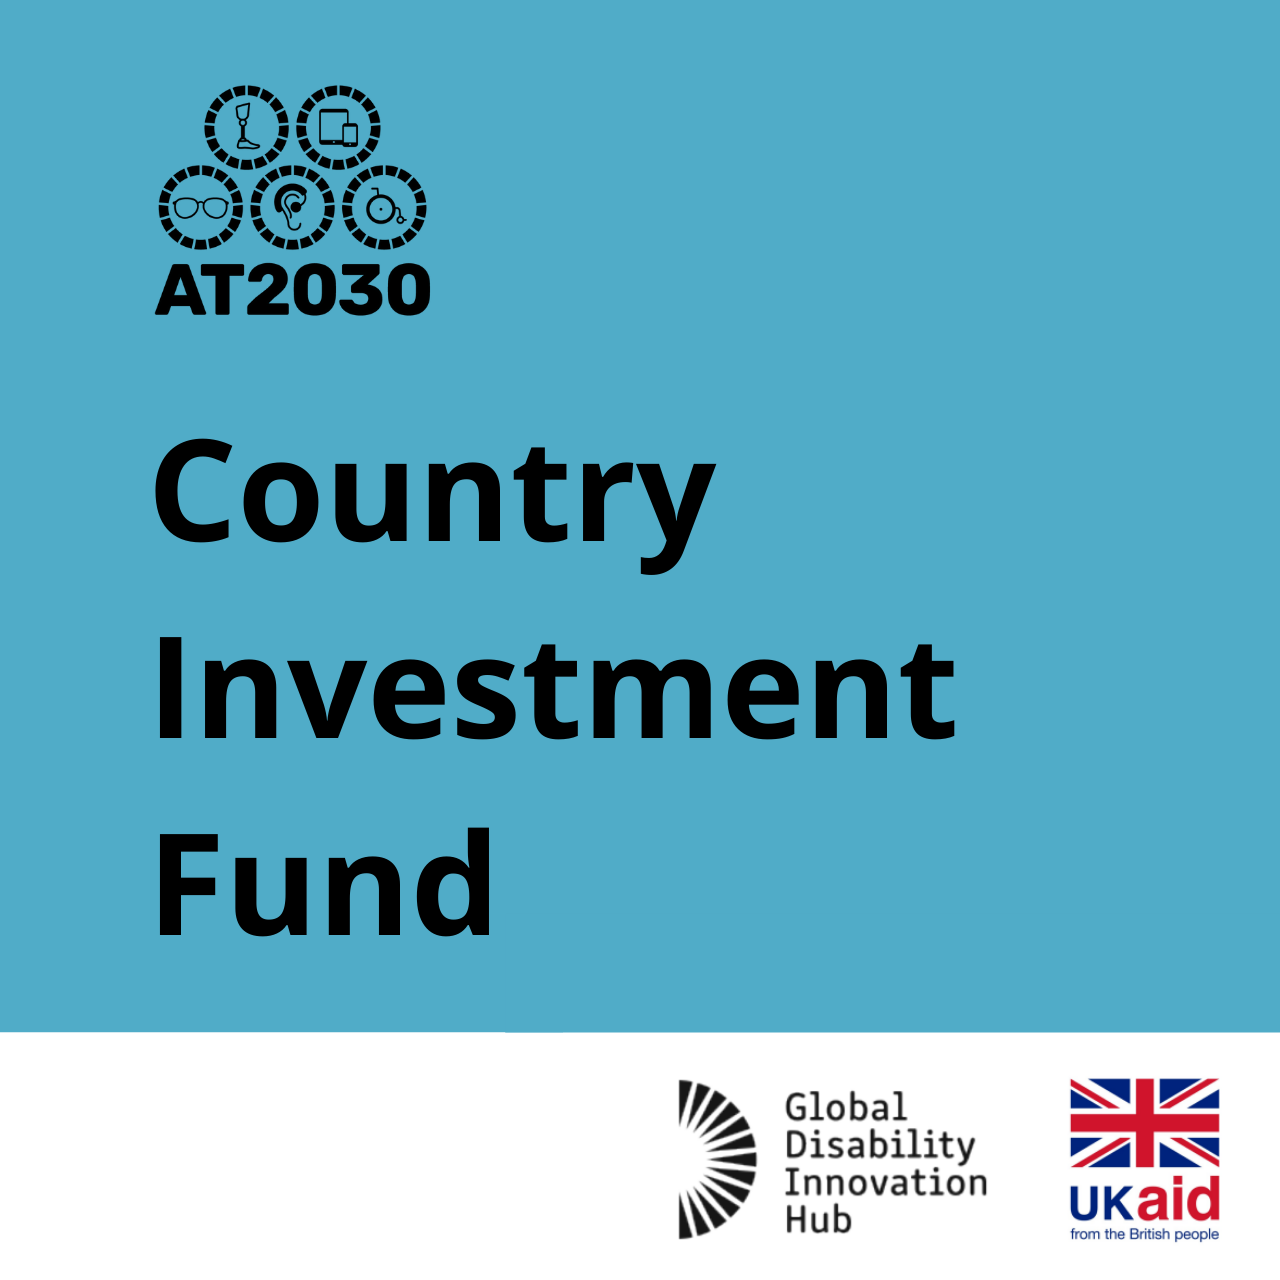 Country Investment Fund promo Cover Image